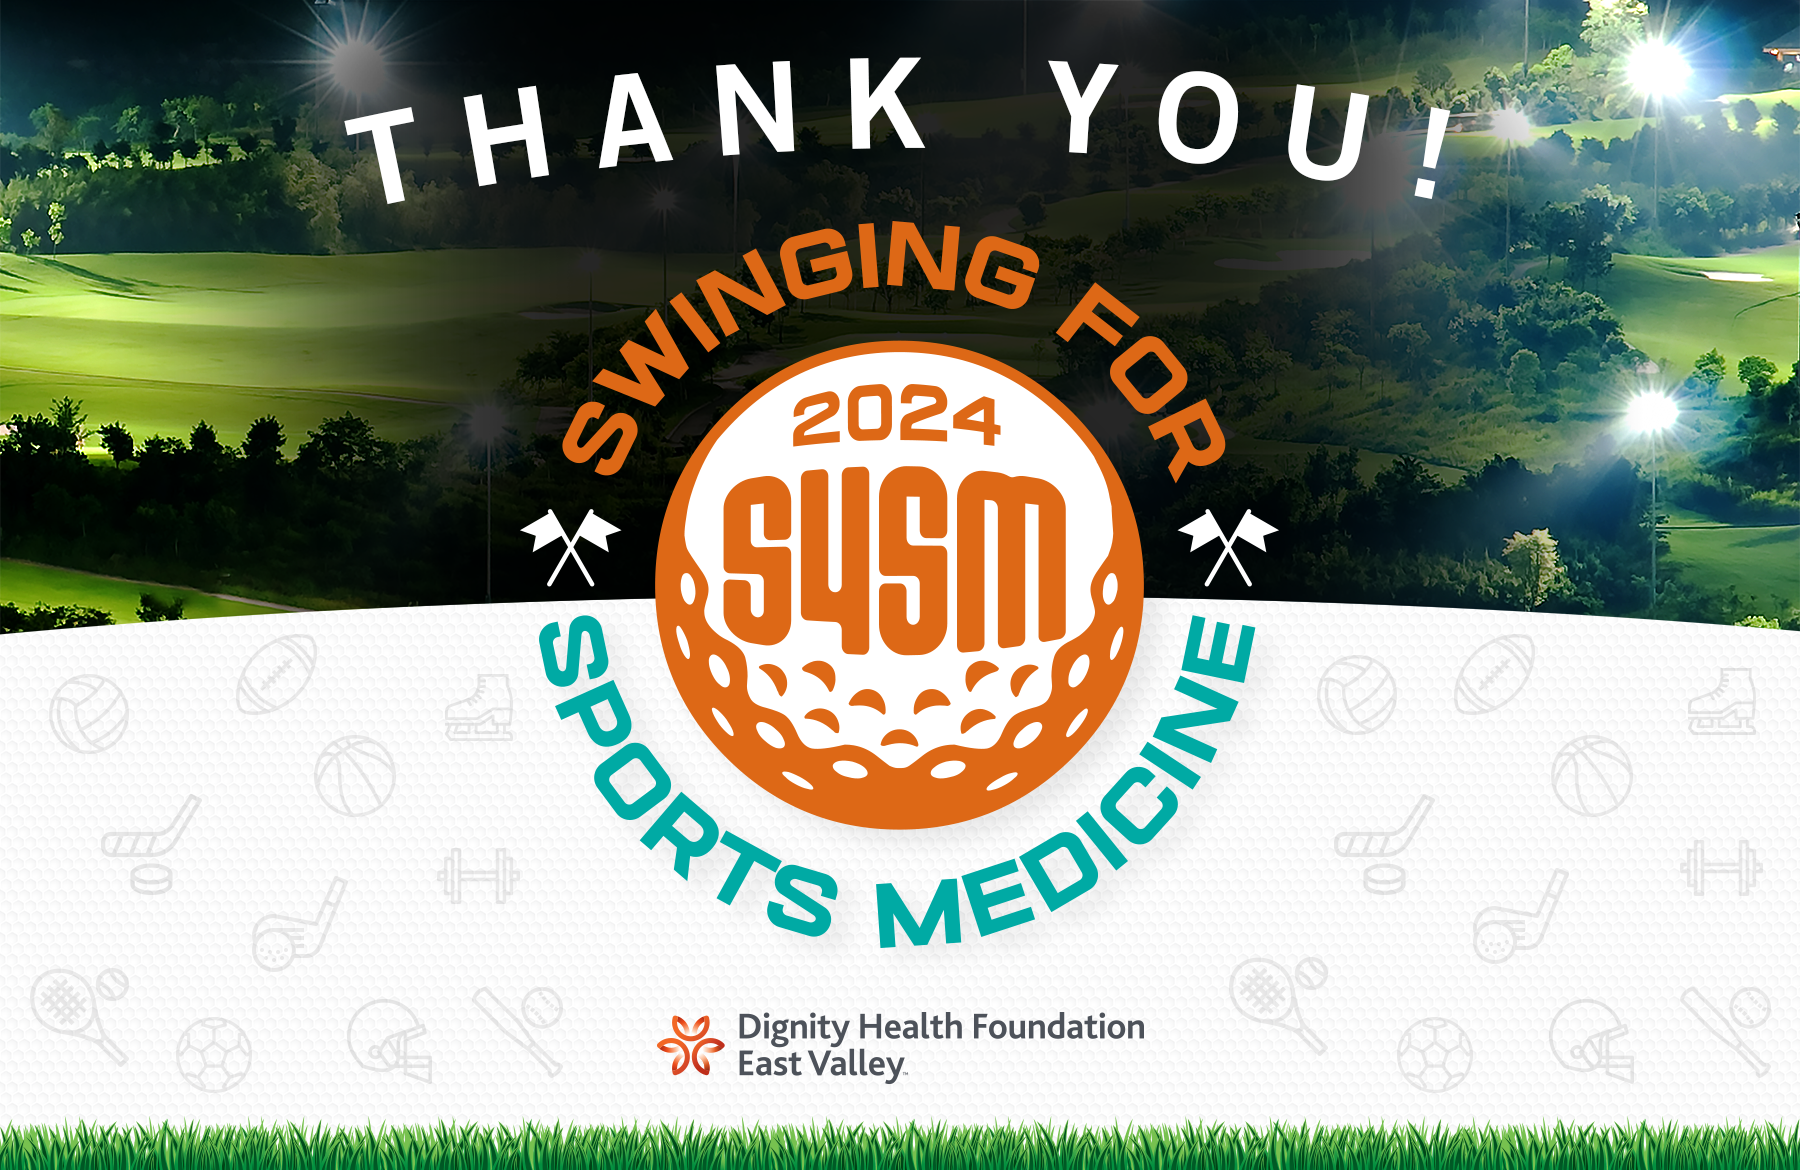 Swinging for Sports Medicine Banner with lighted golf course image and text